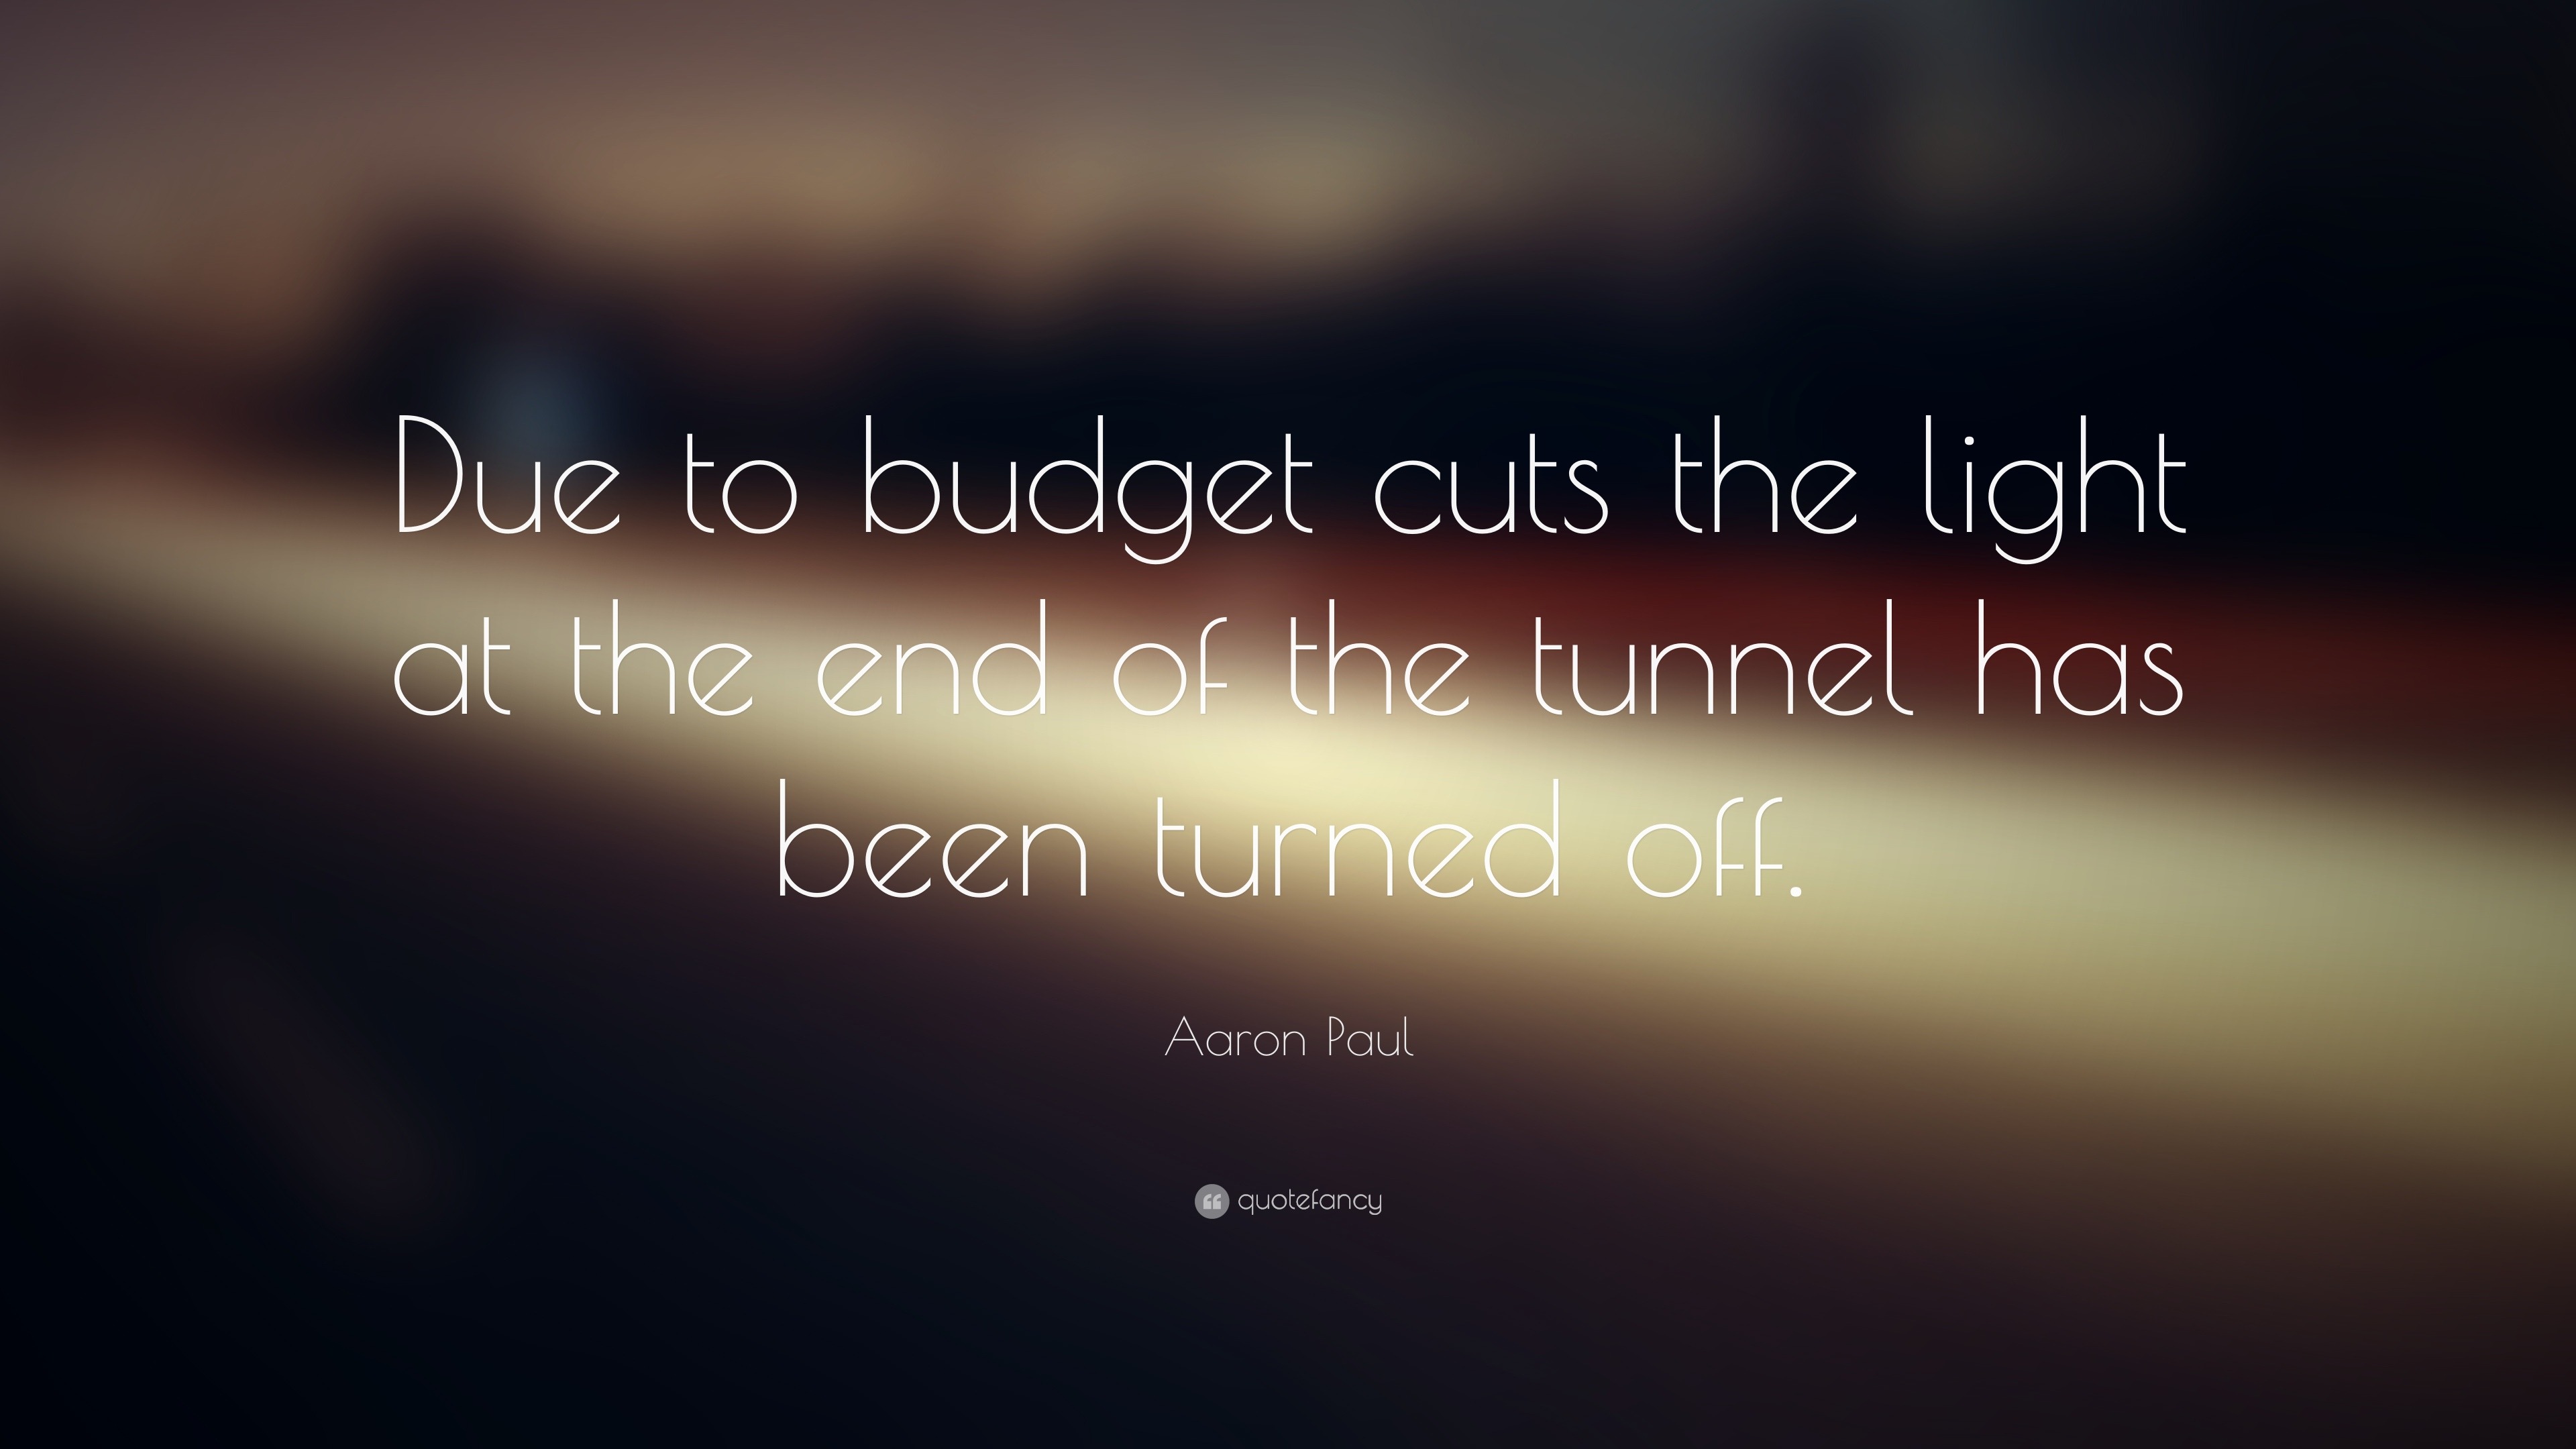 Aaron Paul Quote: “Due to budget cuts the light at the end of the tunnel has